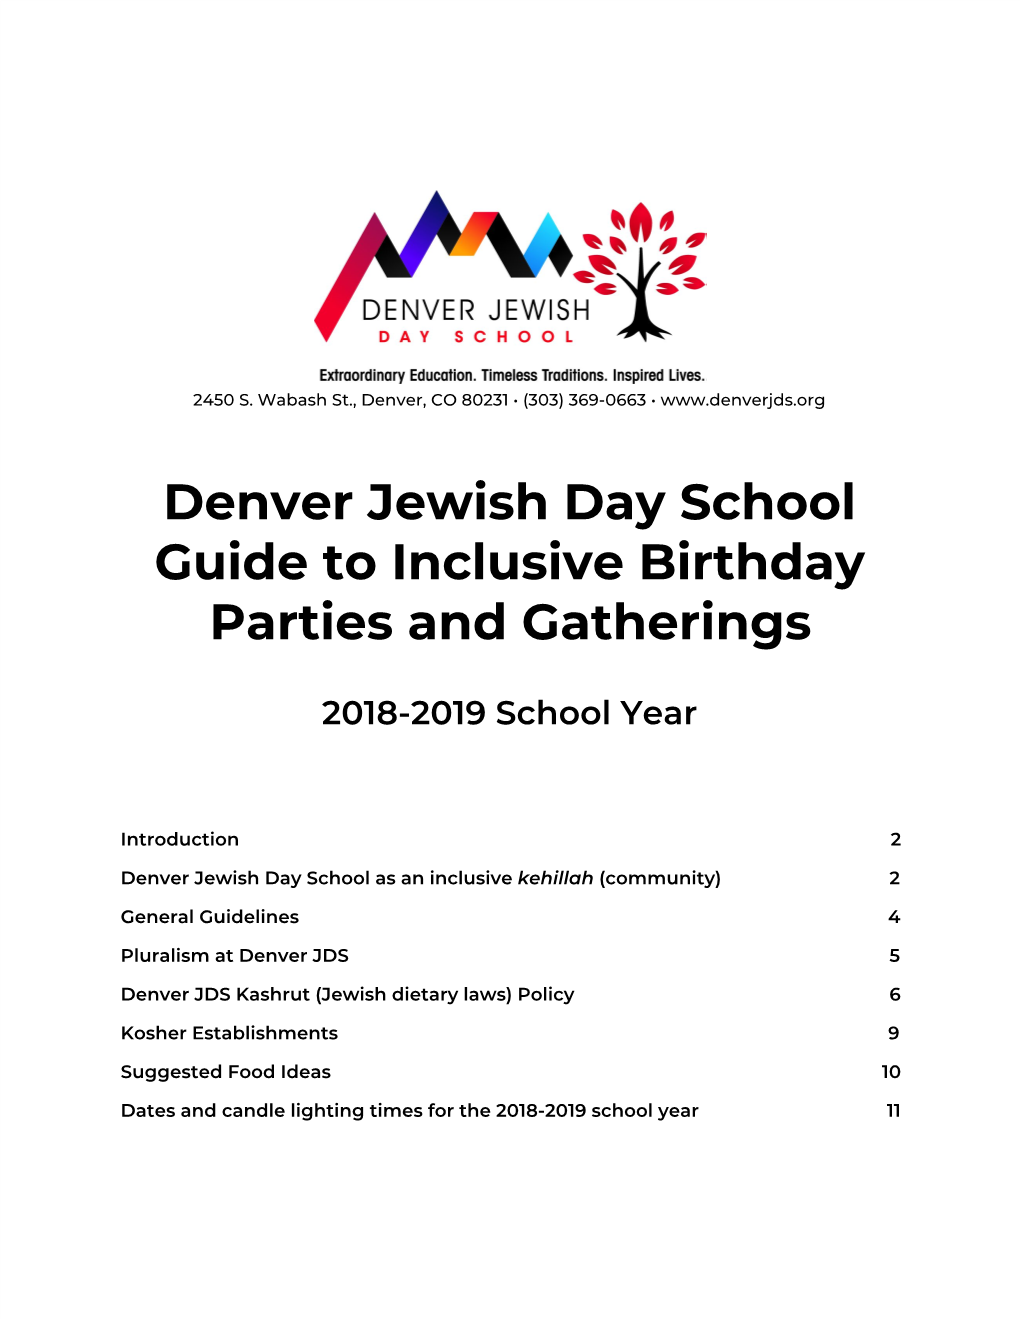 Denver Jewish Day School Guide to Inclusive Birthday Parties and Gatherings